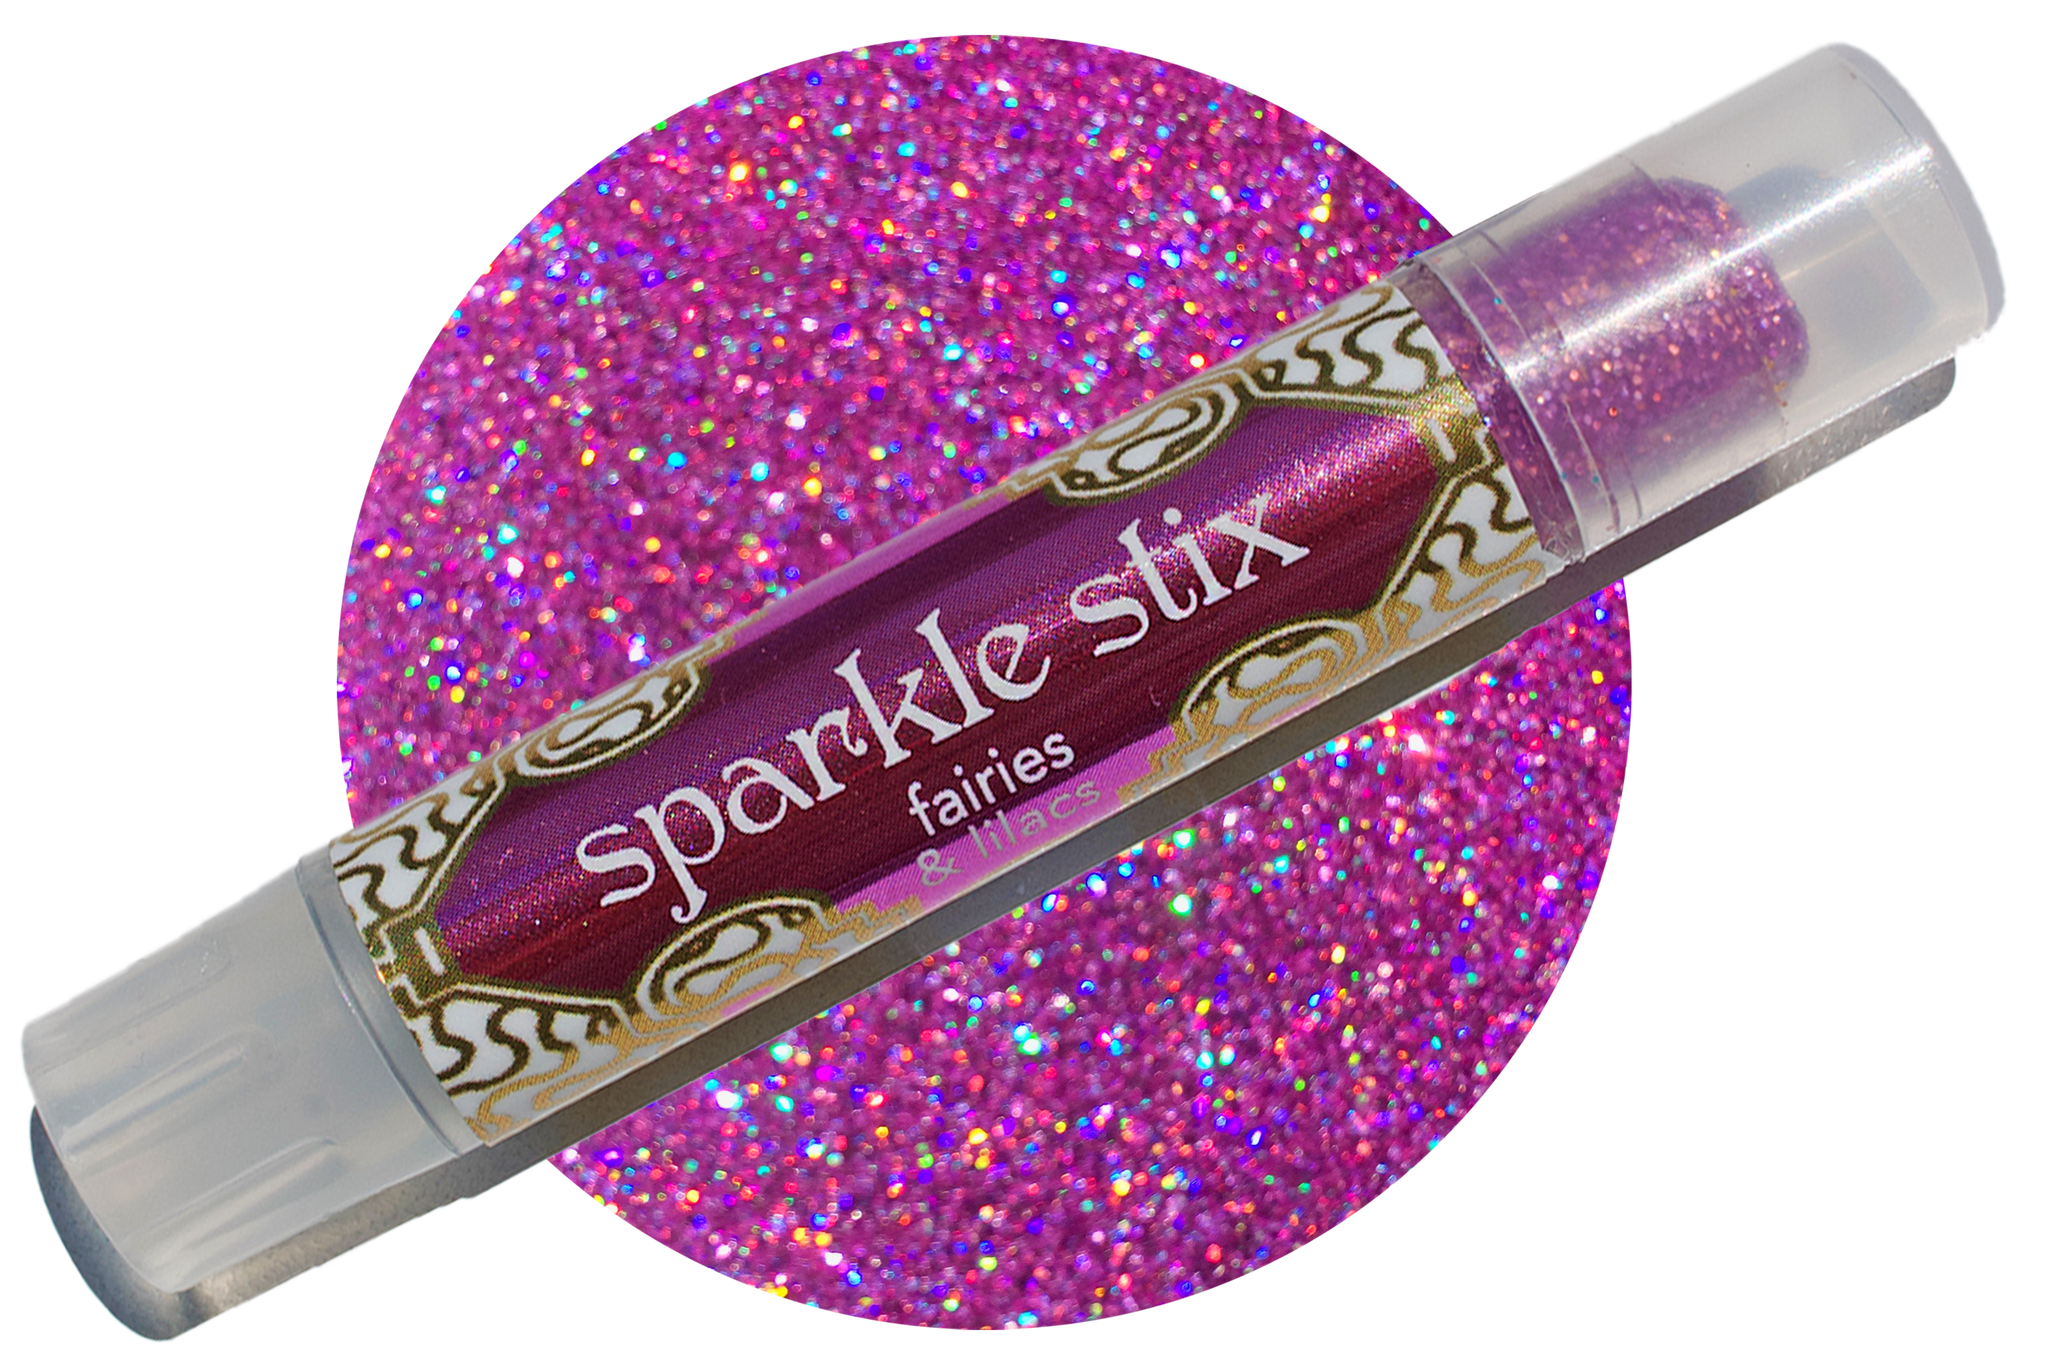 Rainbow Sparkle Stix ~ the collection organic glitter for face + body